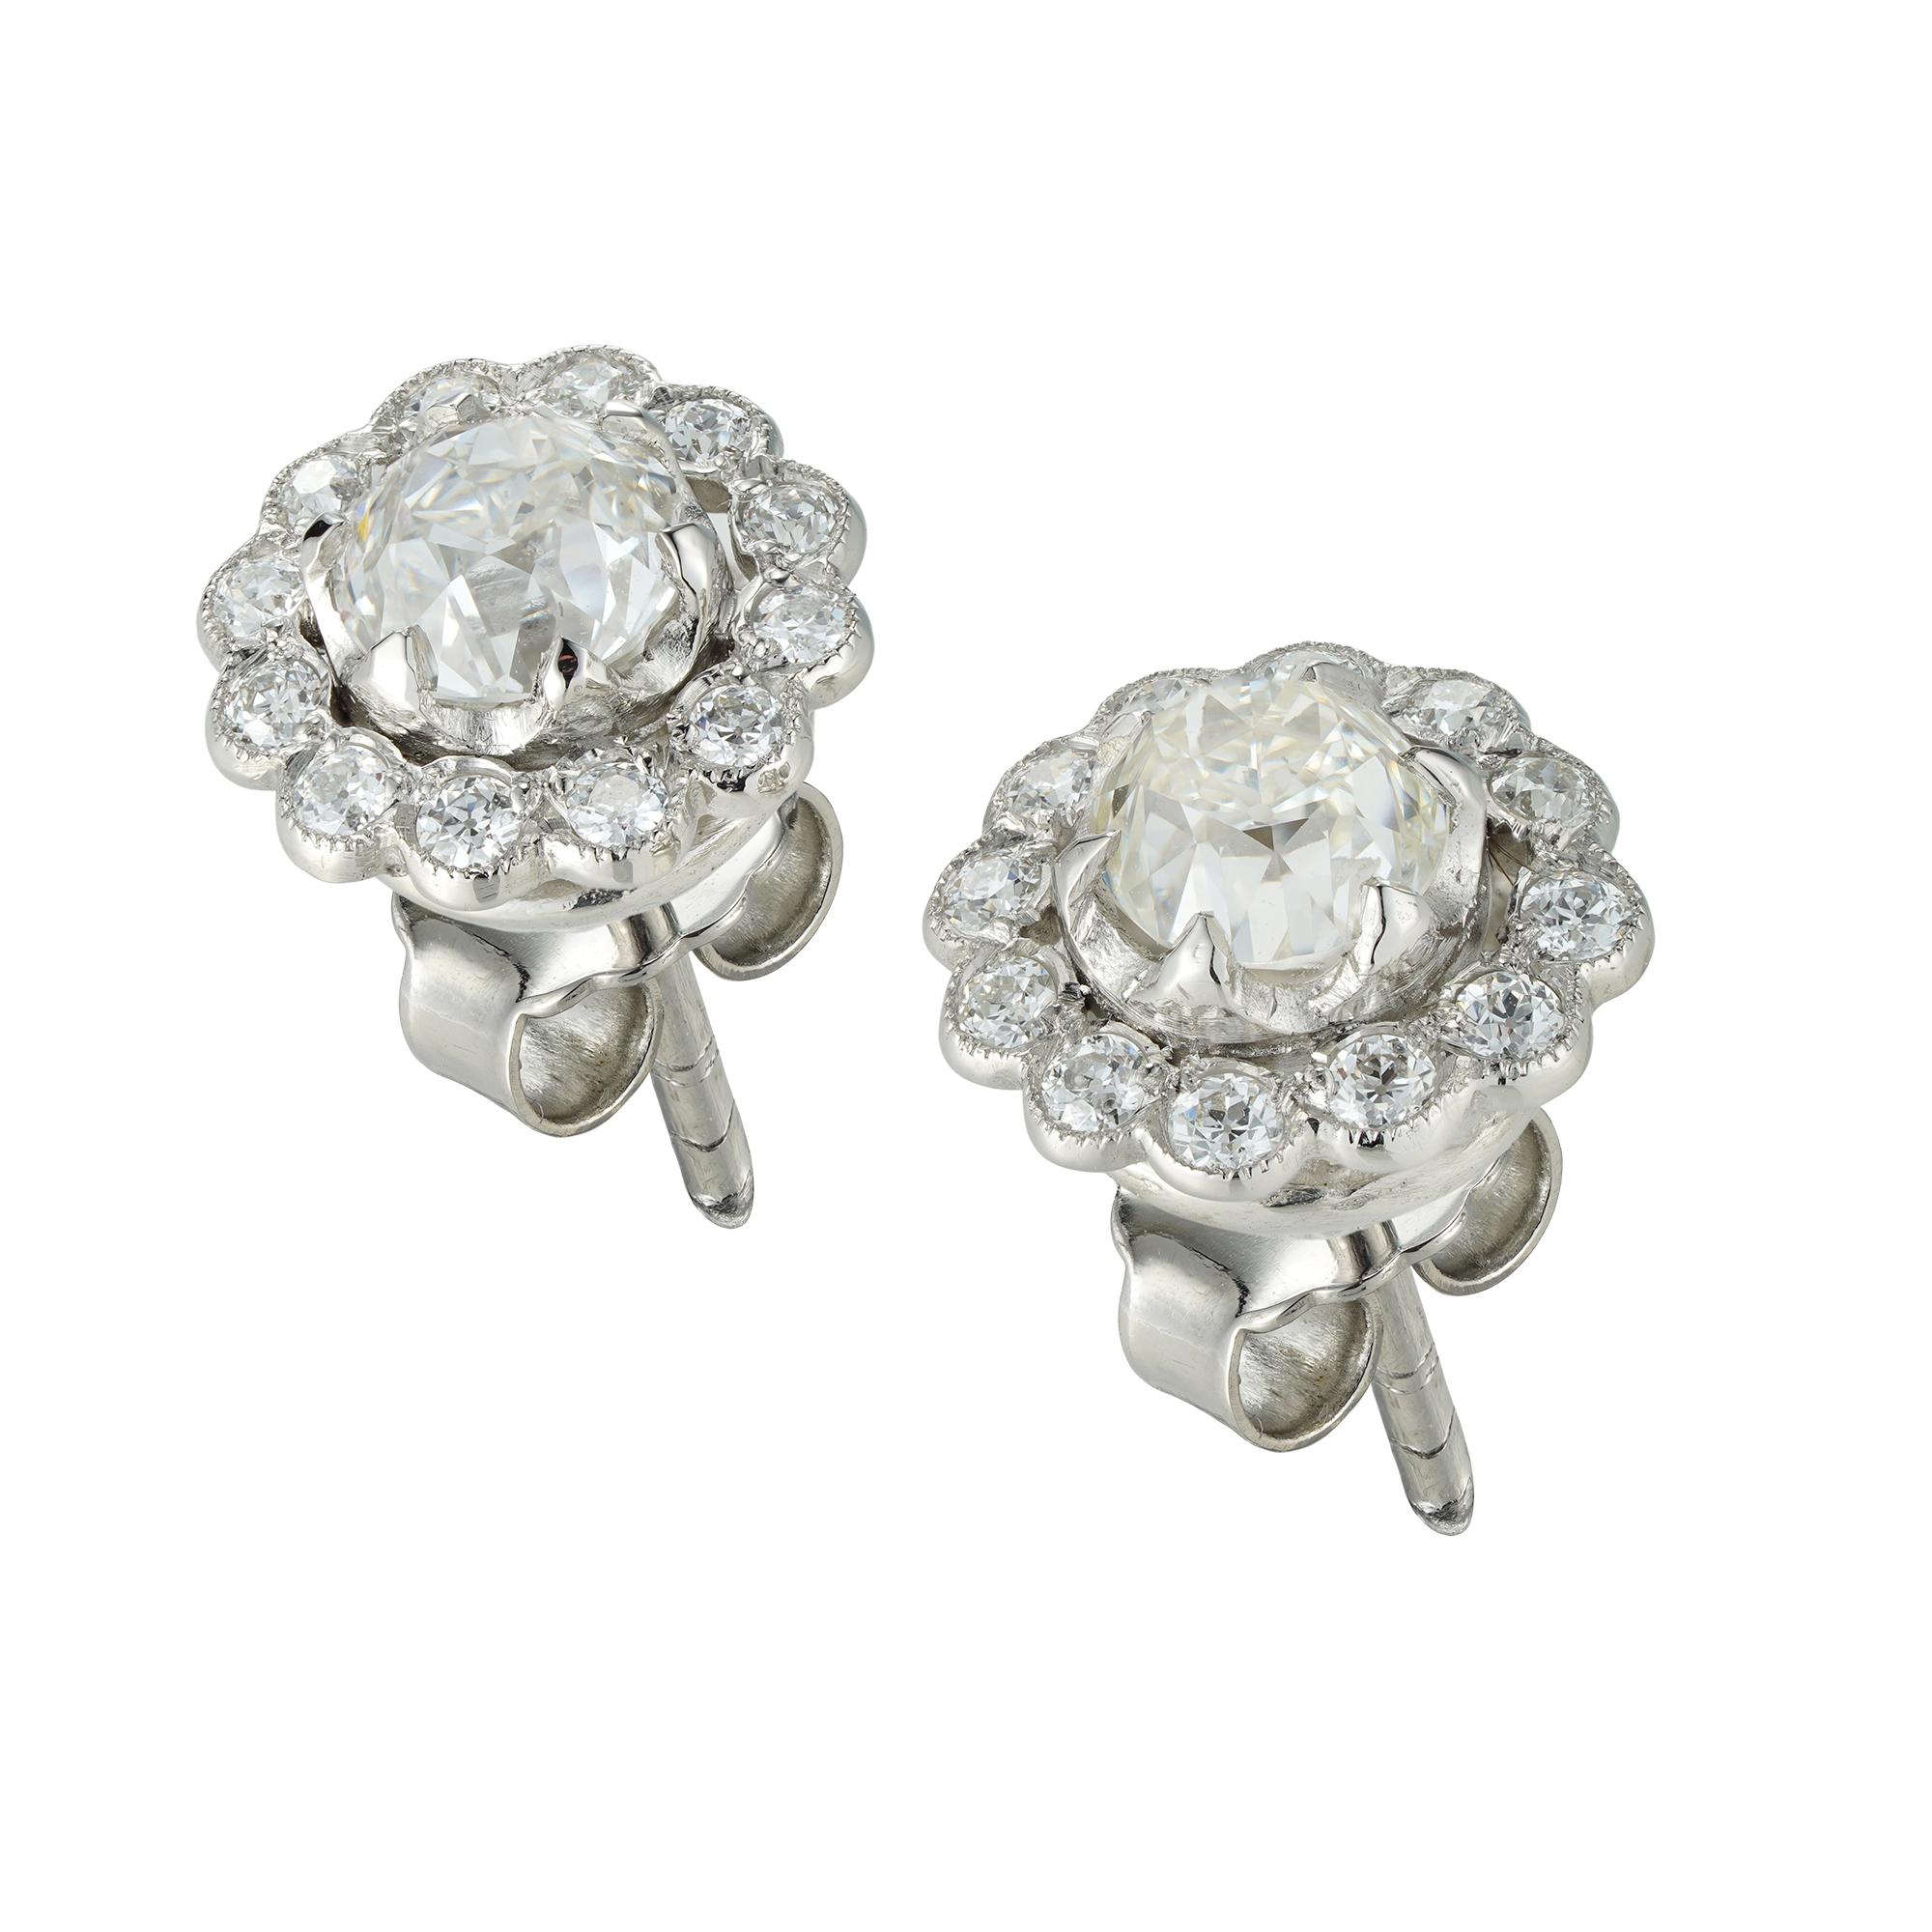 A pair of diamond cluster earrings, the central old brilliant-cut diamonds weighing 1.23 carats, each surrounded by twelve tiny round brilliant-cut diamonds, weighing a further total of 0.25cts, claw and millegrain set in platinum mount, with post